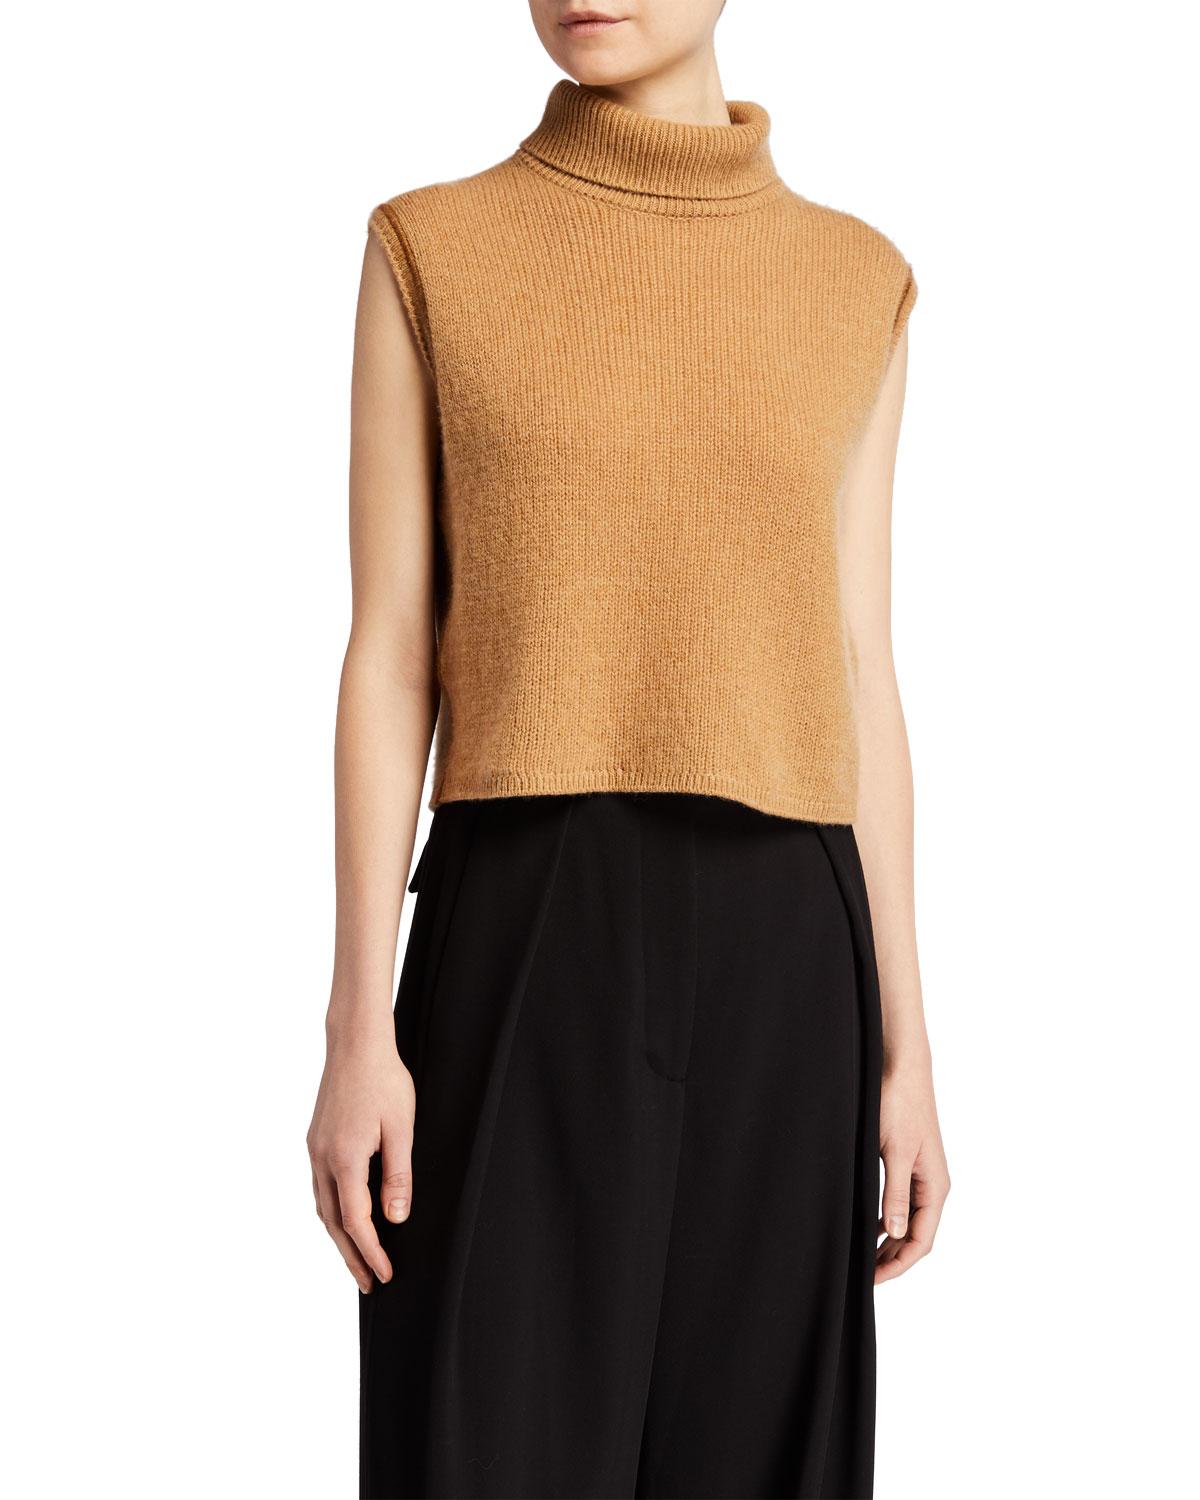 The Row Giselle Cashmere Turtleneck Sleeveless Sweater - Lyst